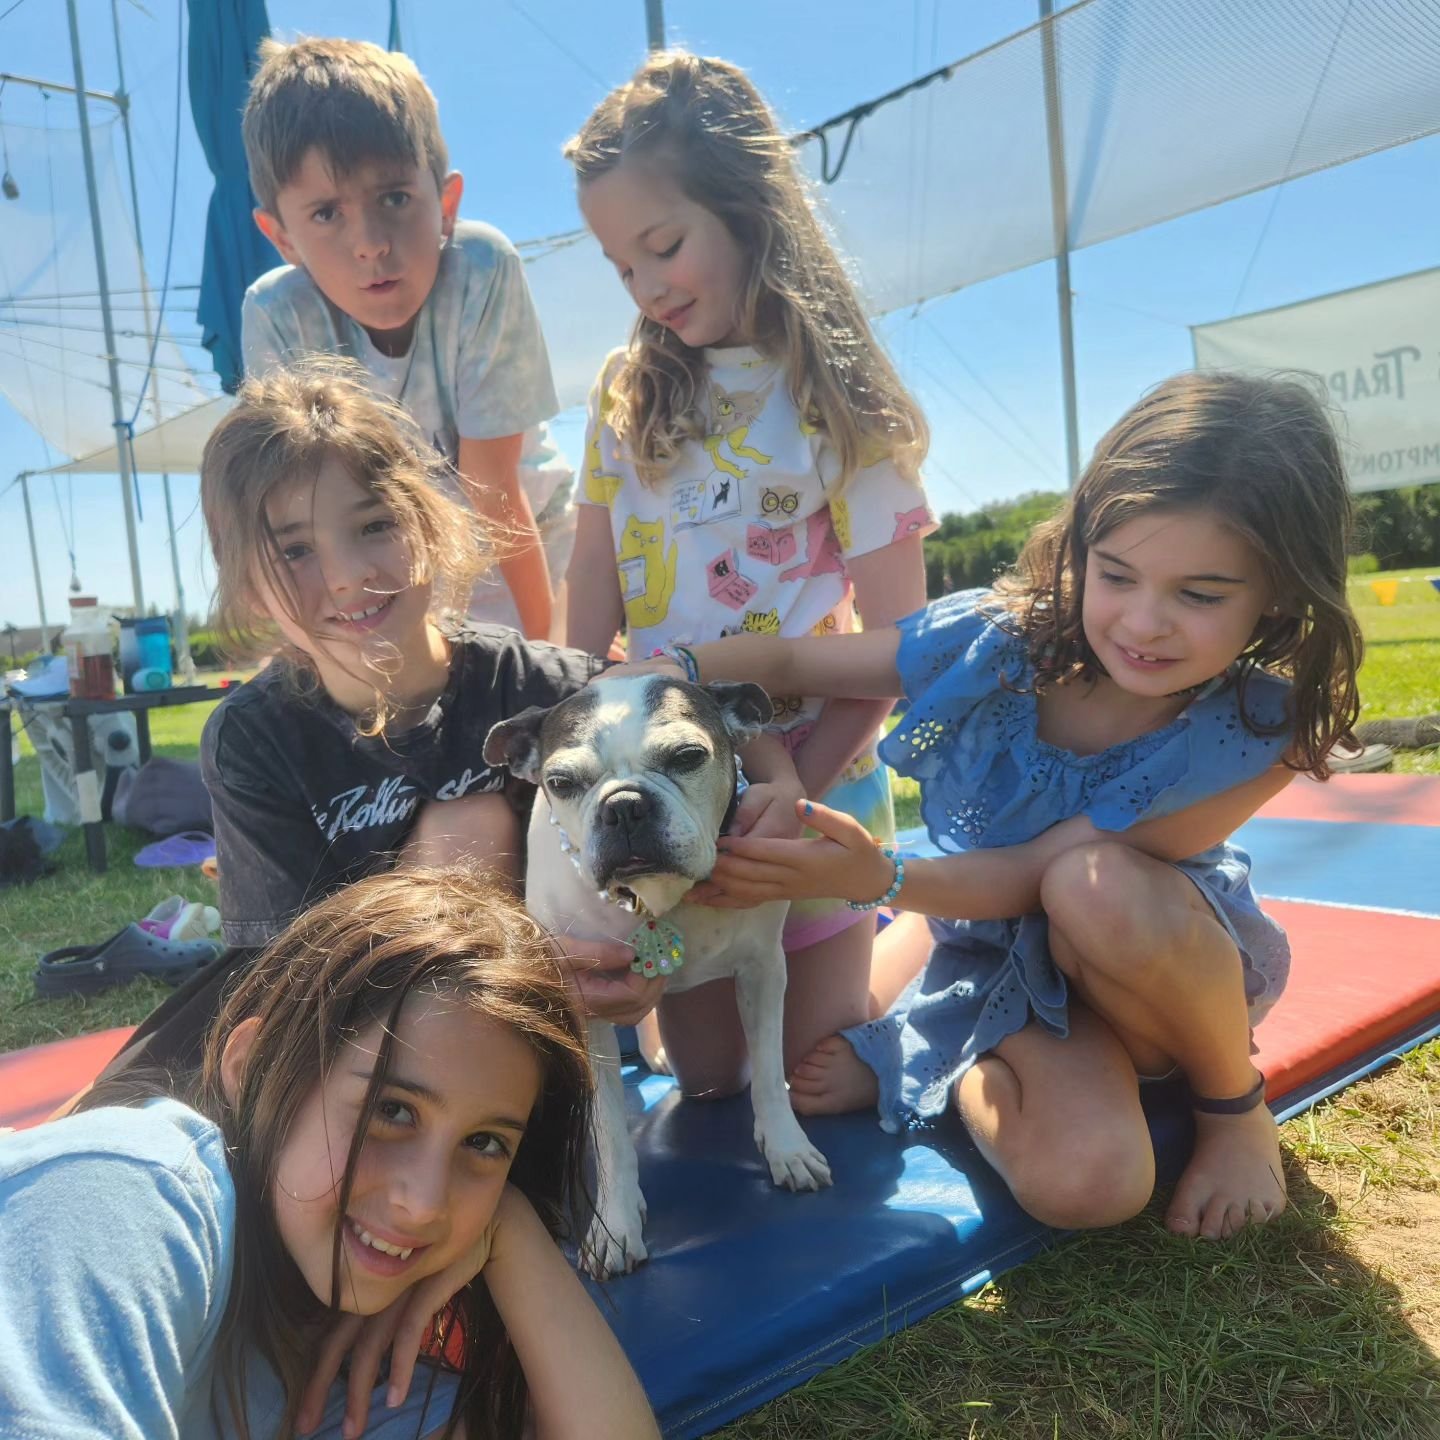 Fun with friends at trapeze 🐕

There's still a few places in the August workshop! Link in bio to register 🎟